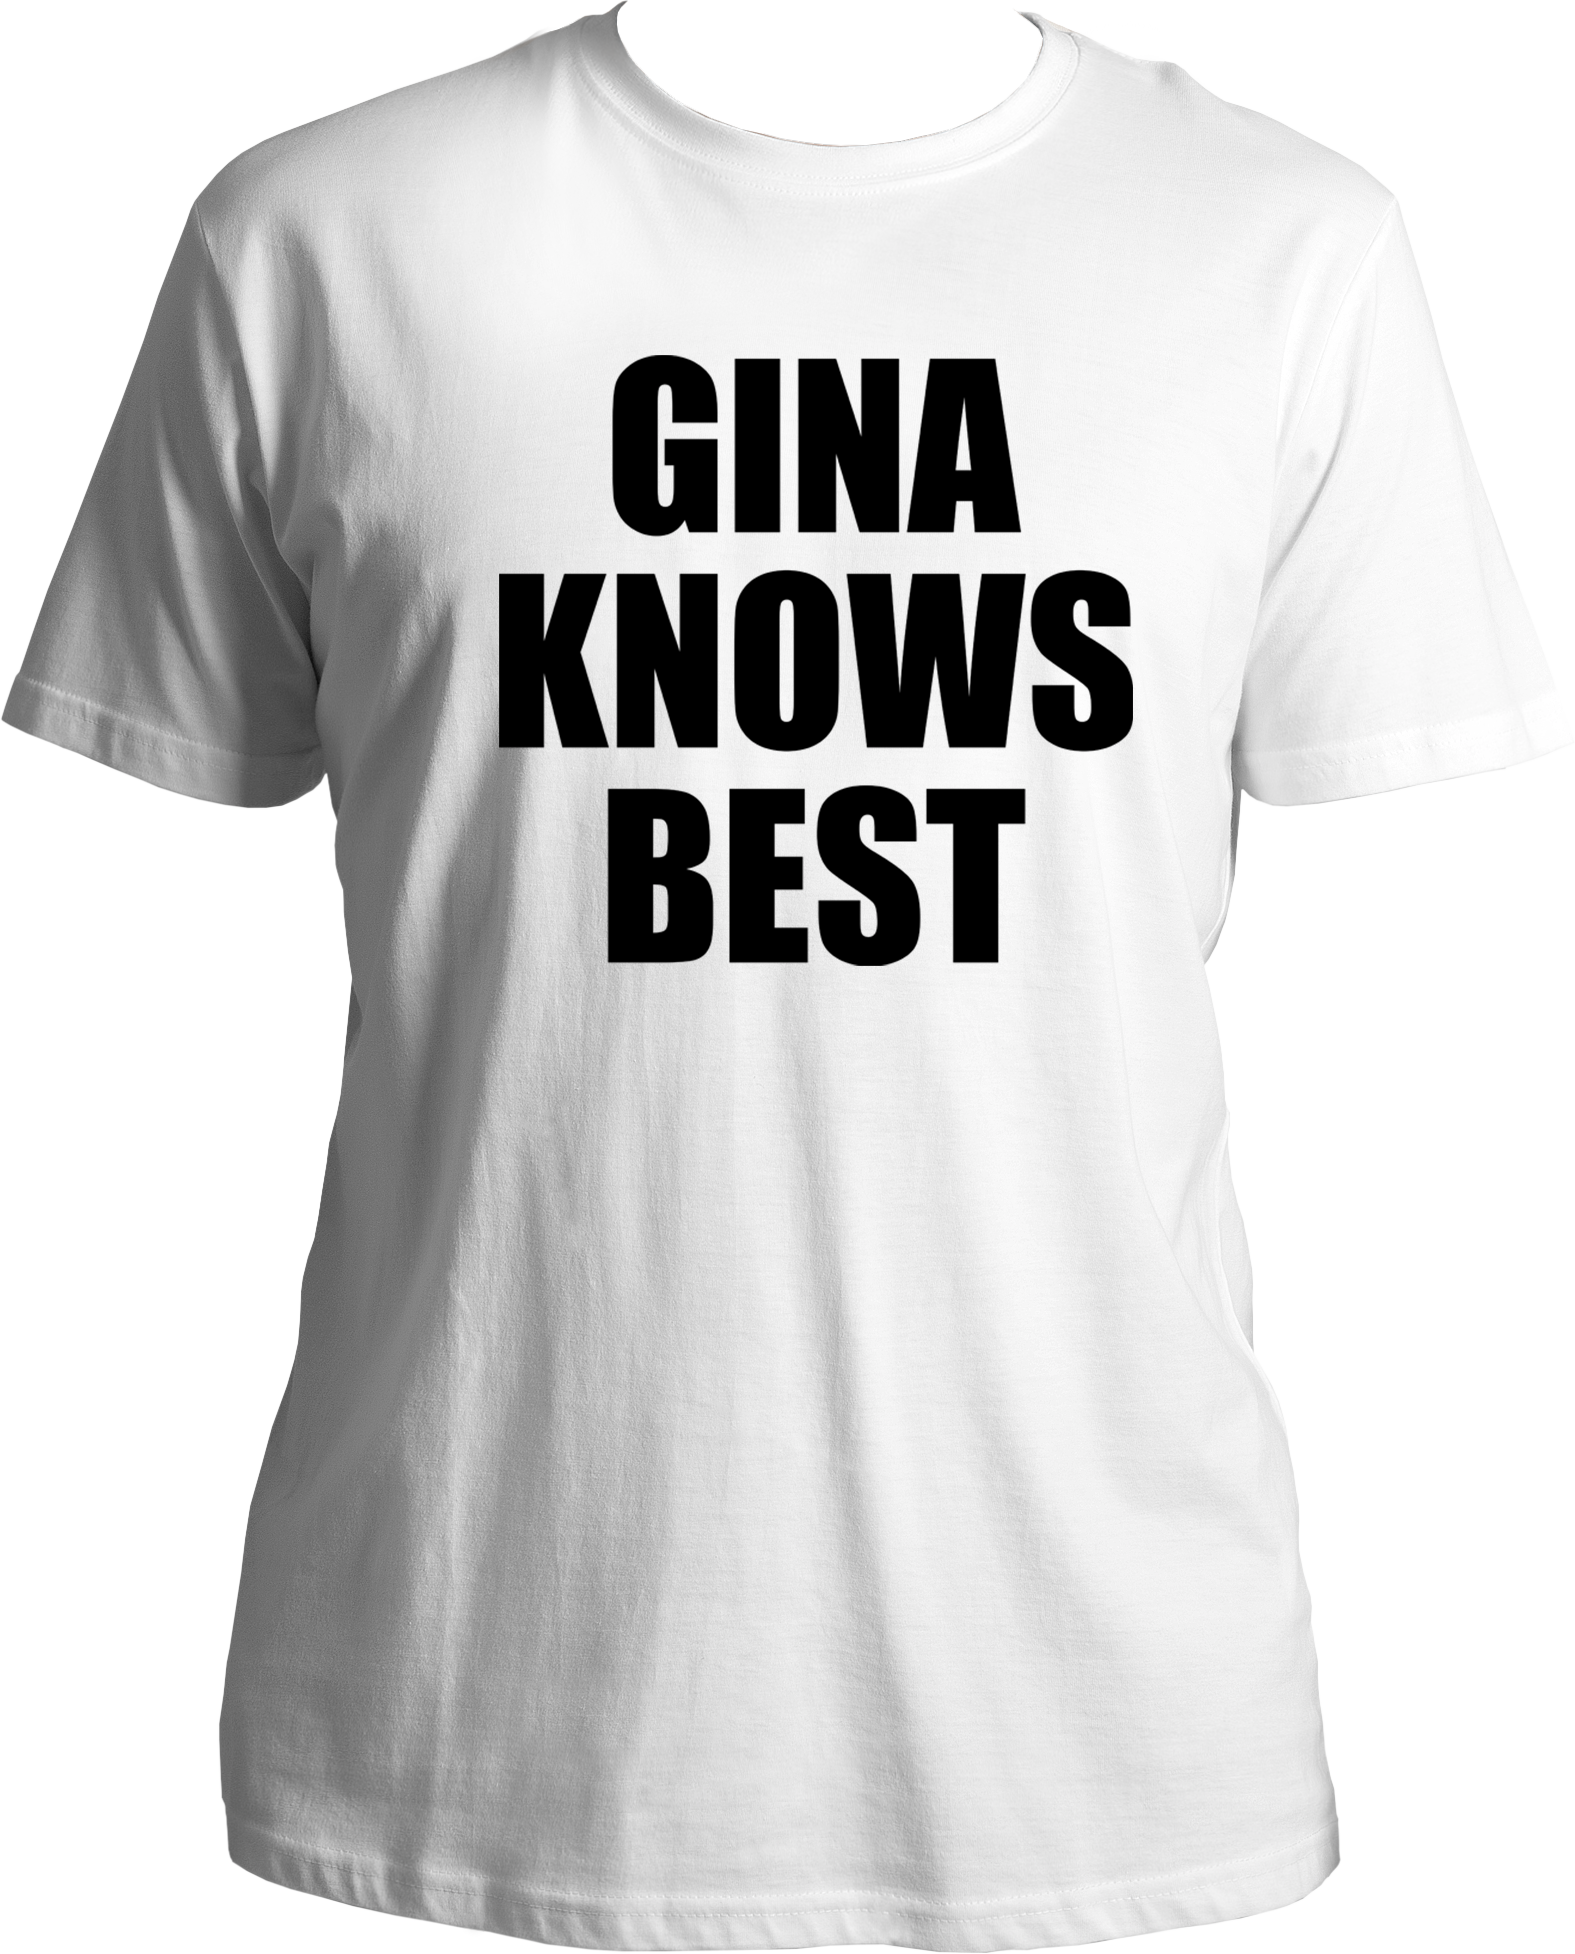 Welcome to our T-shirt universe, where fandom meets fashion! Introducing our Unisex Cotton T-shirt from the TV Shows category, specifically under the Brooklyn Nine-Nine subcategory. Get ready to flaunt your love for the show with our hilarious "Gina Knows Everything" print!